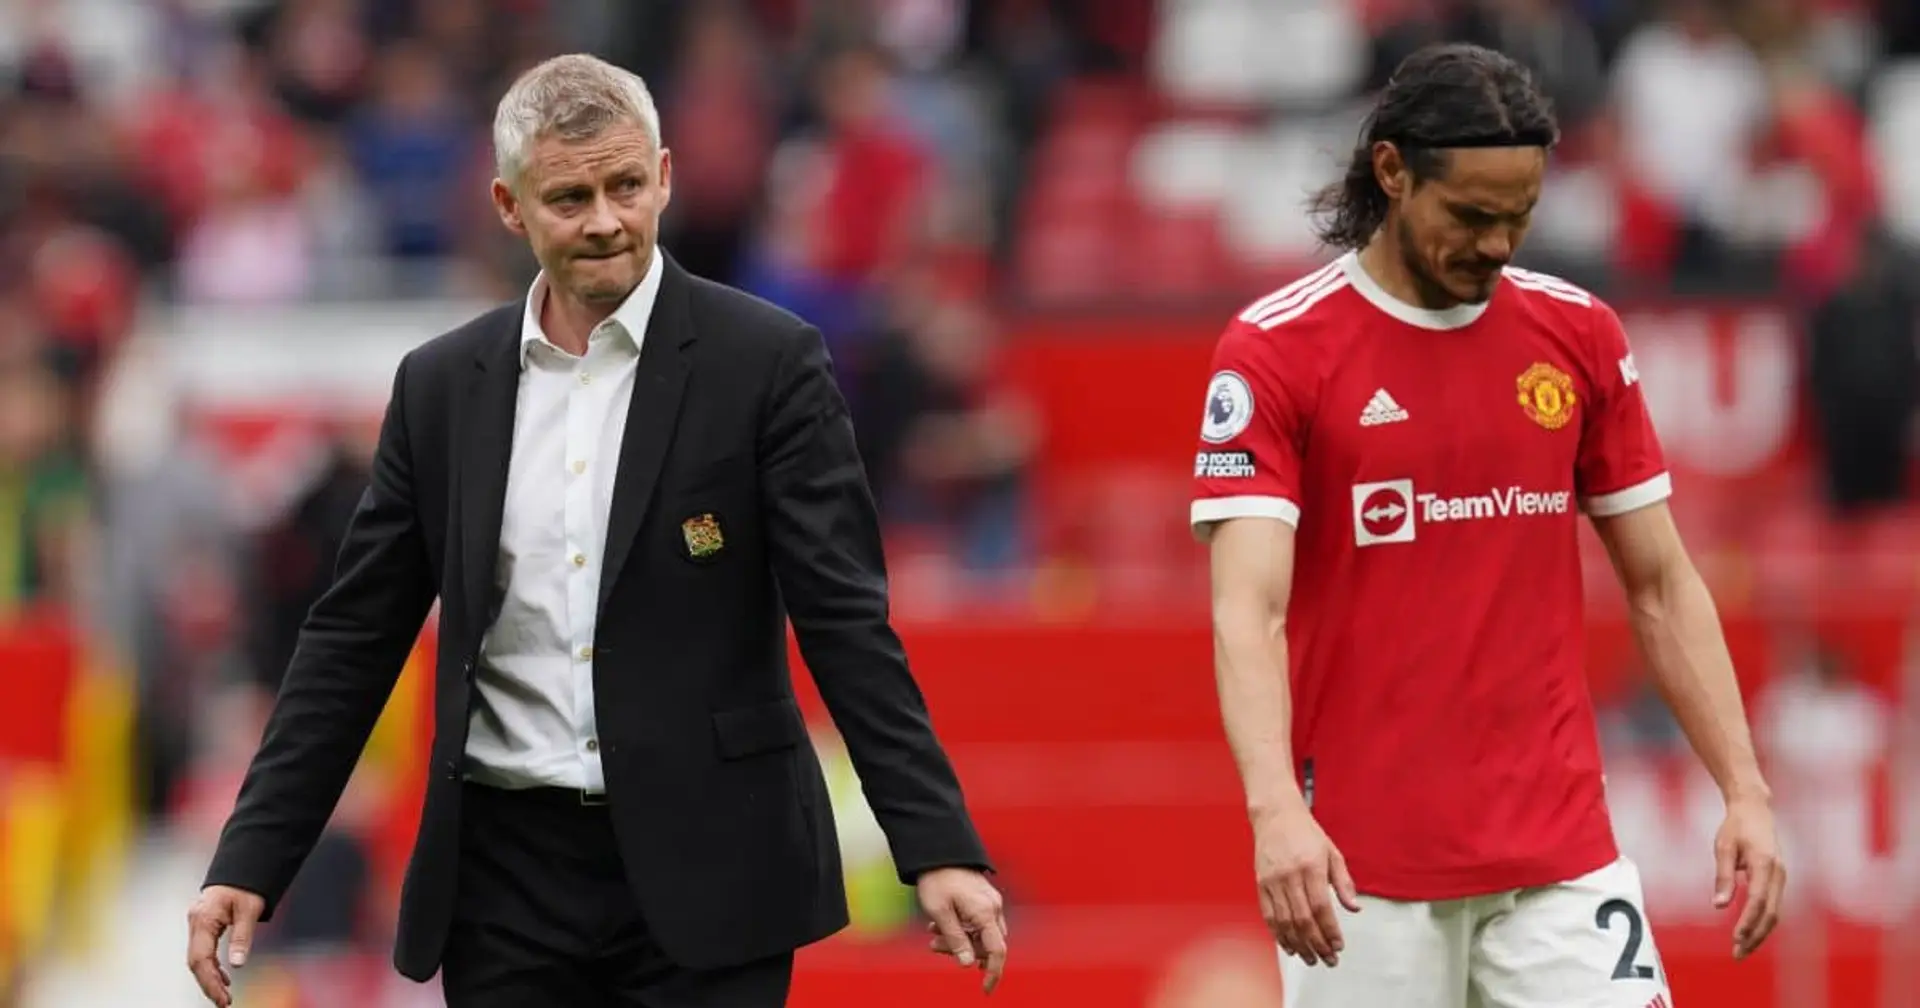 'They're just not ruthless enough': Man United told they will never challenge for the title with Solskjaer